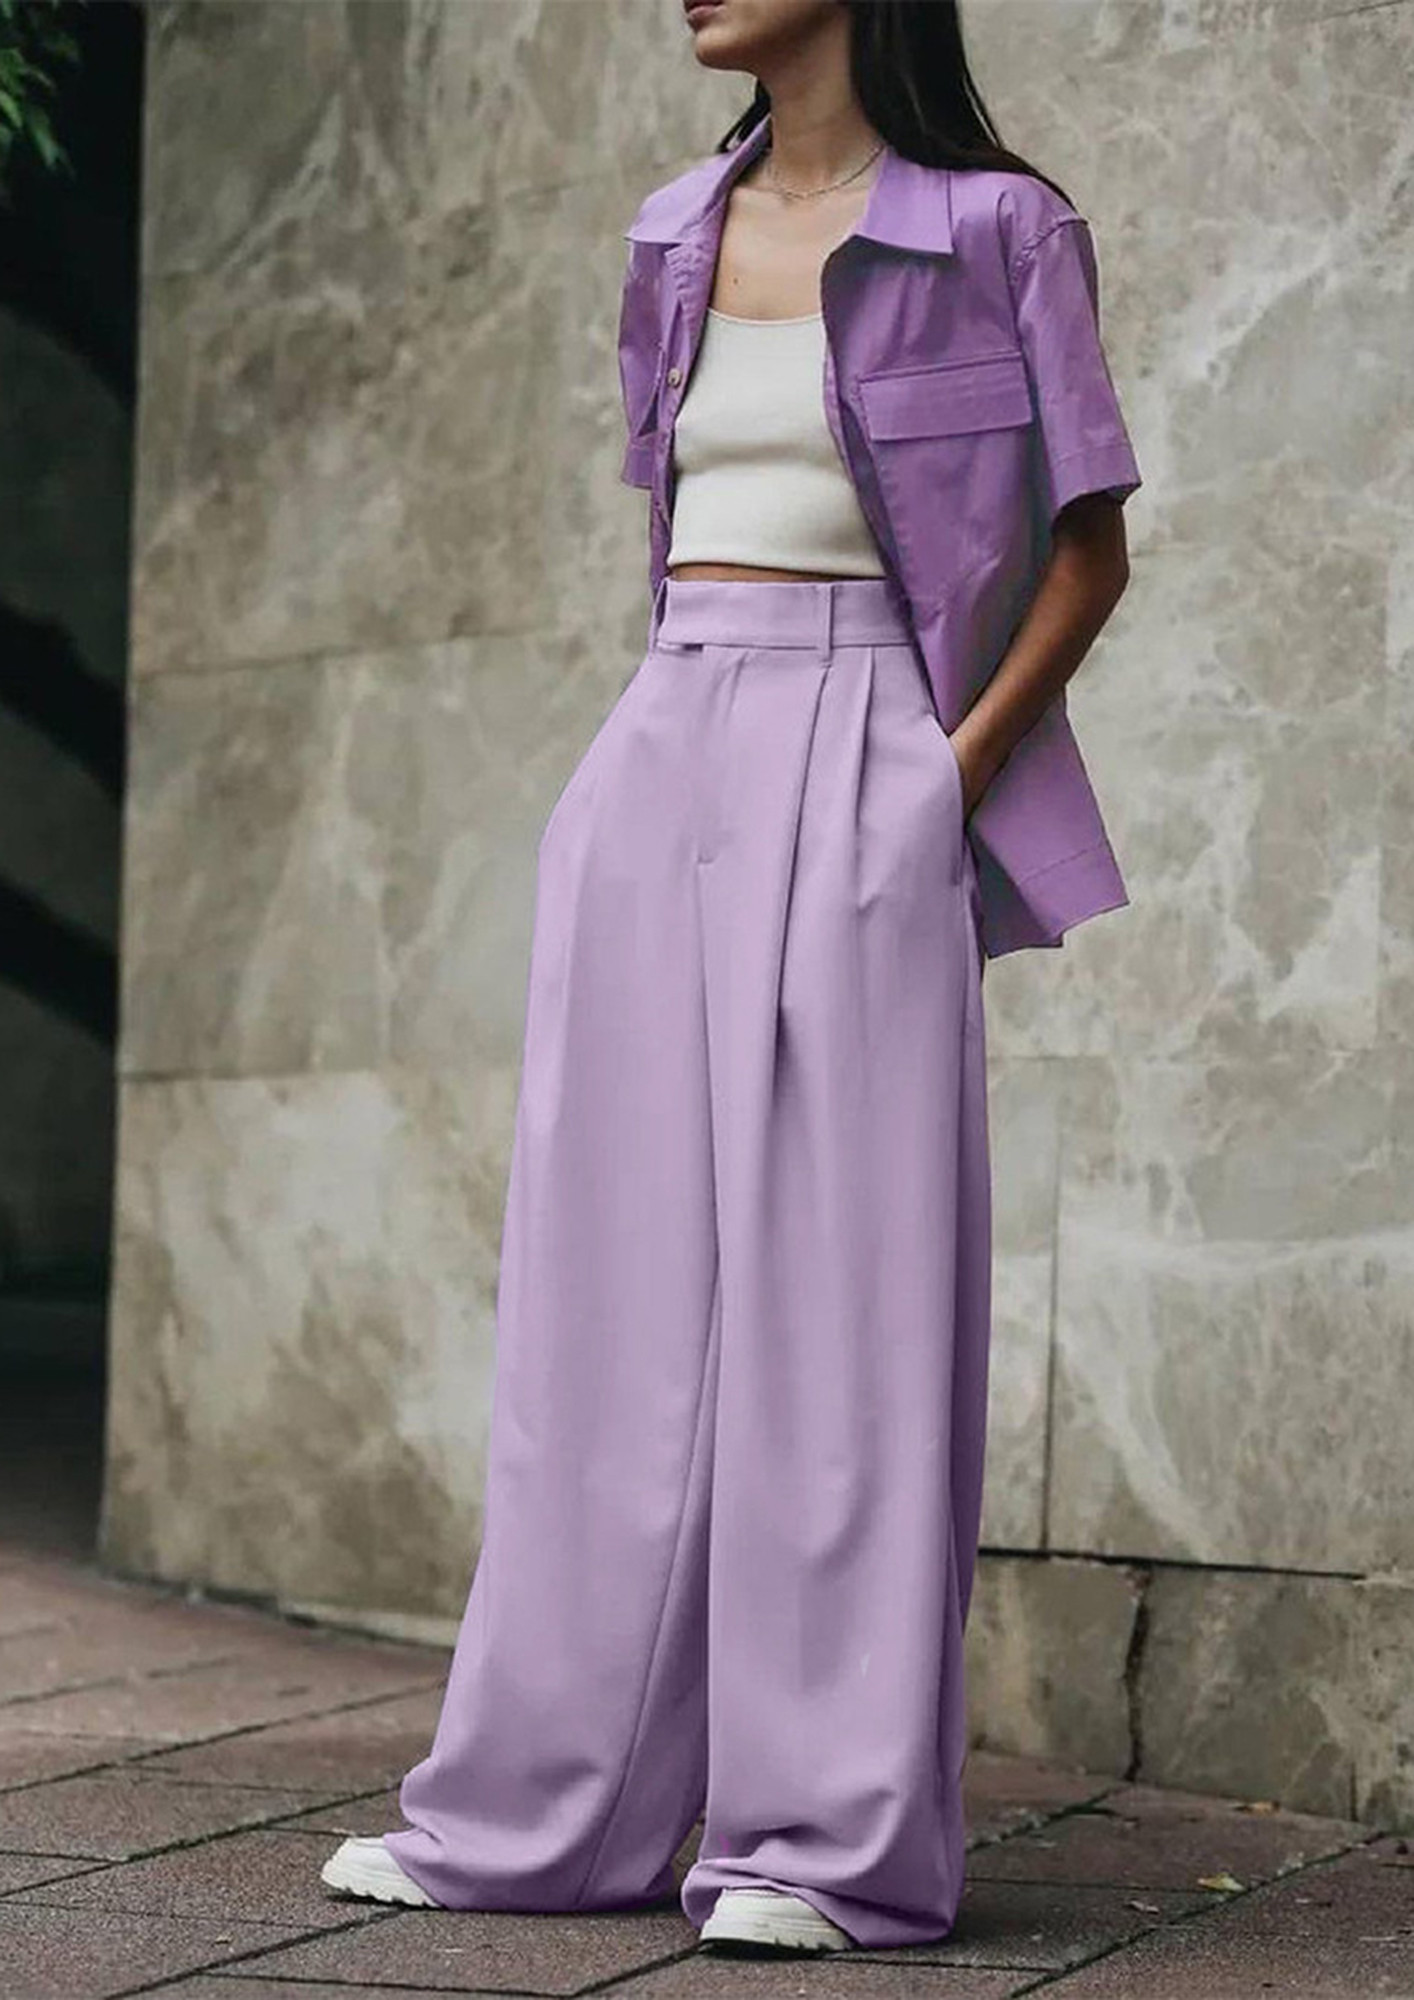 Violet Skinny Pants Outfits (7 ideas & outfits) | Lookastic